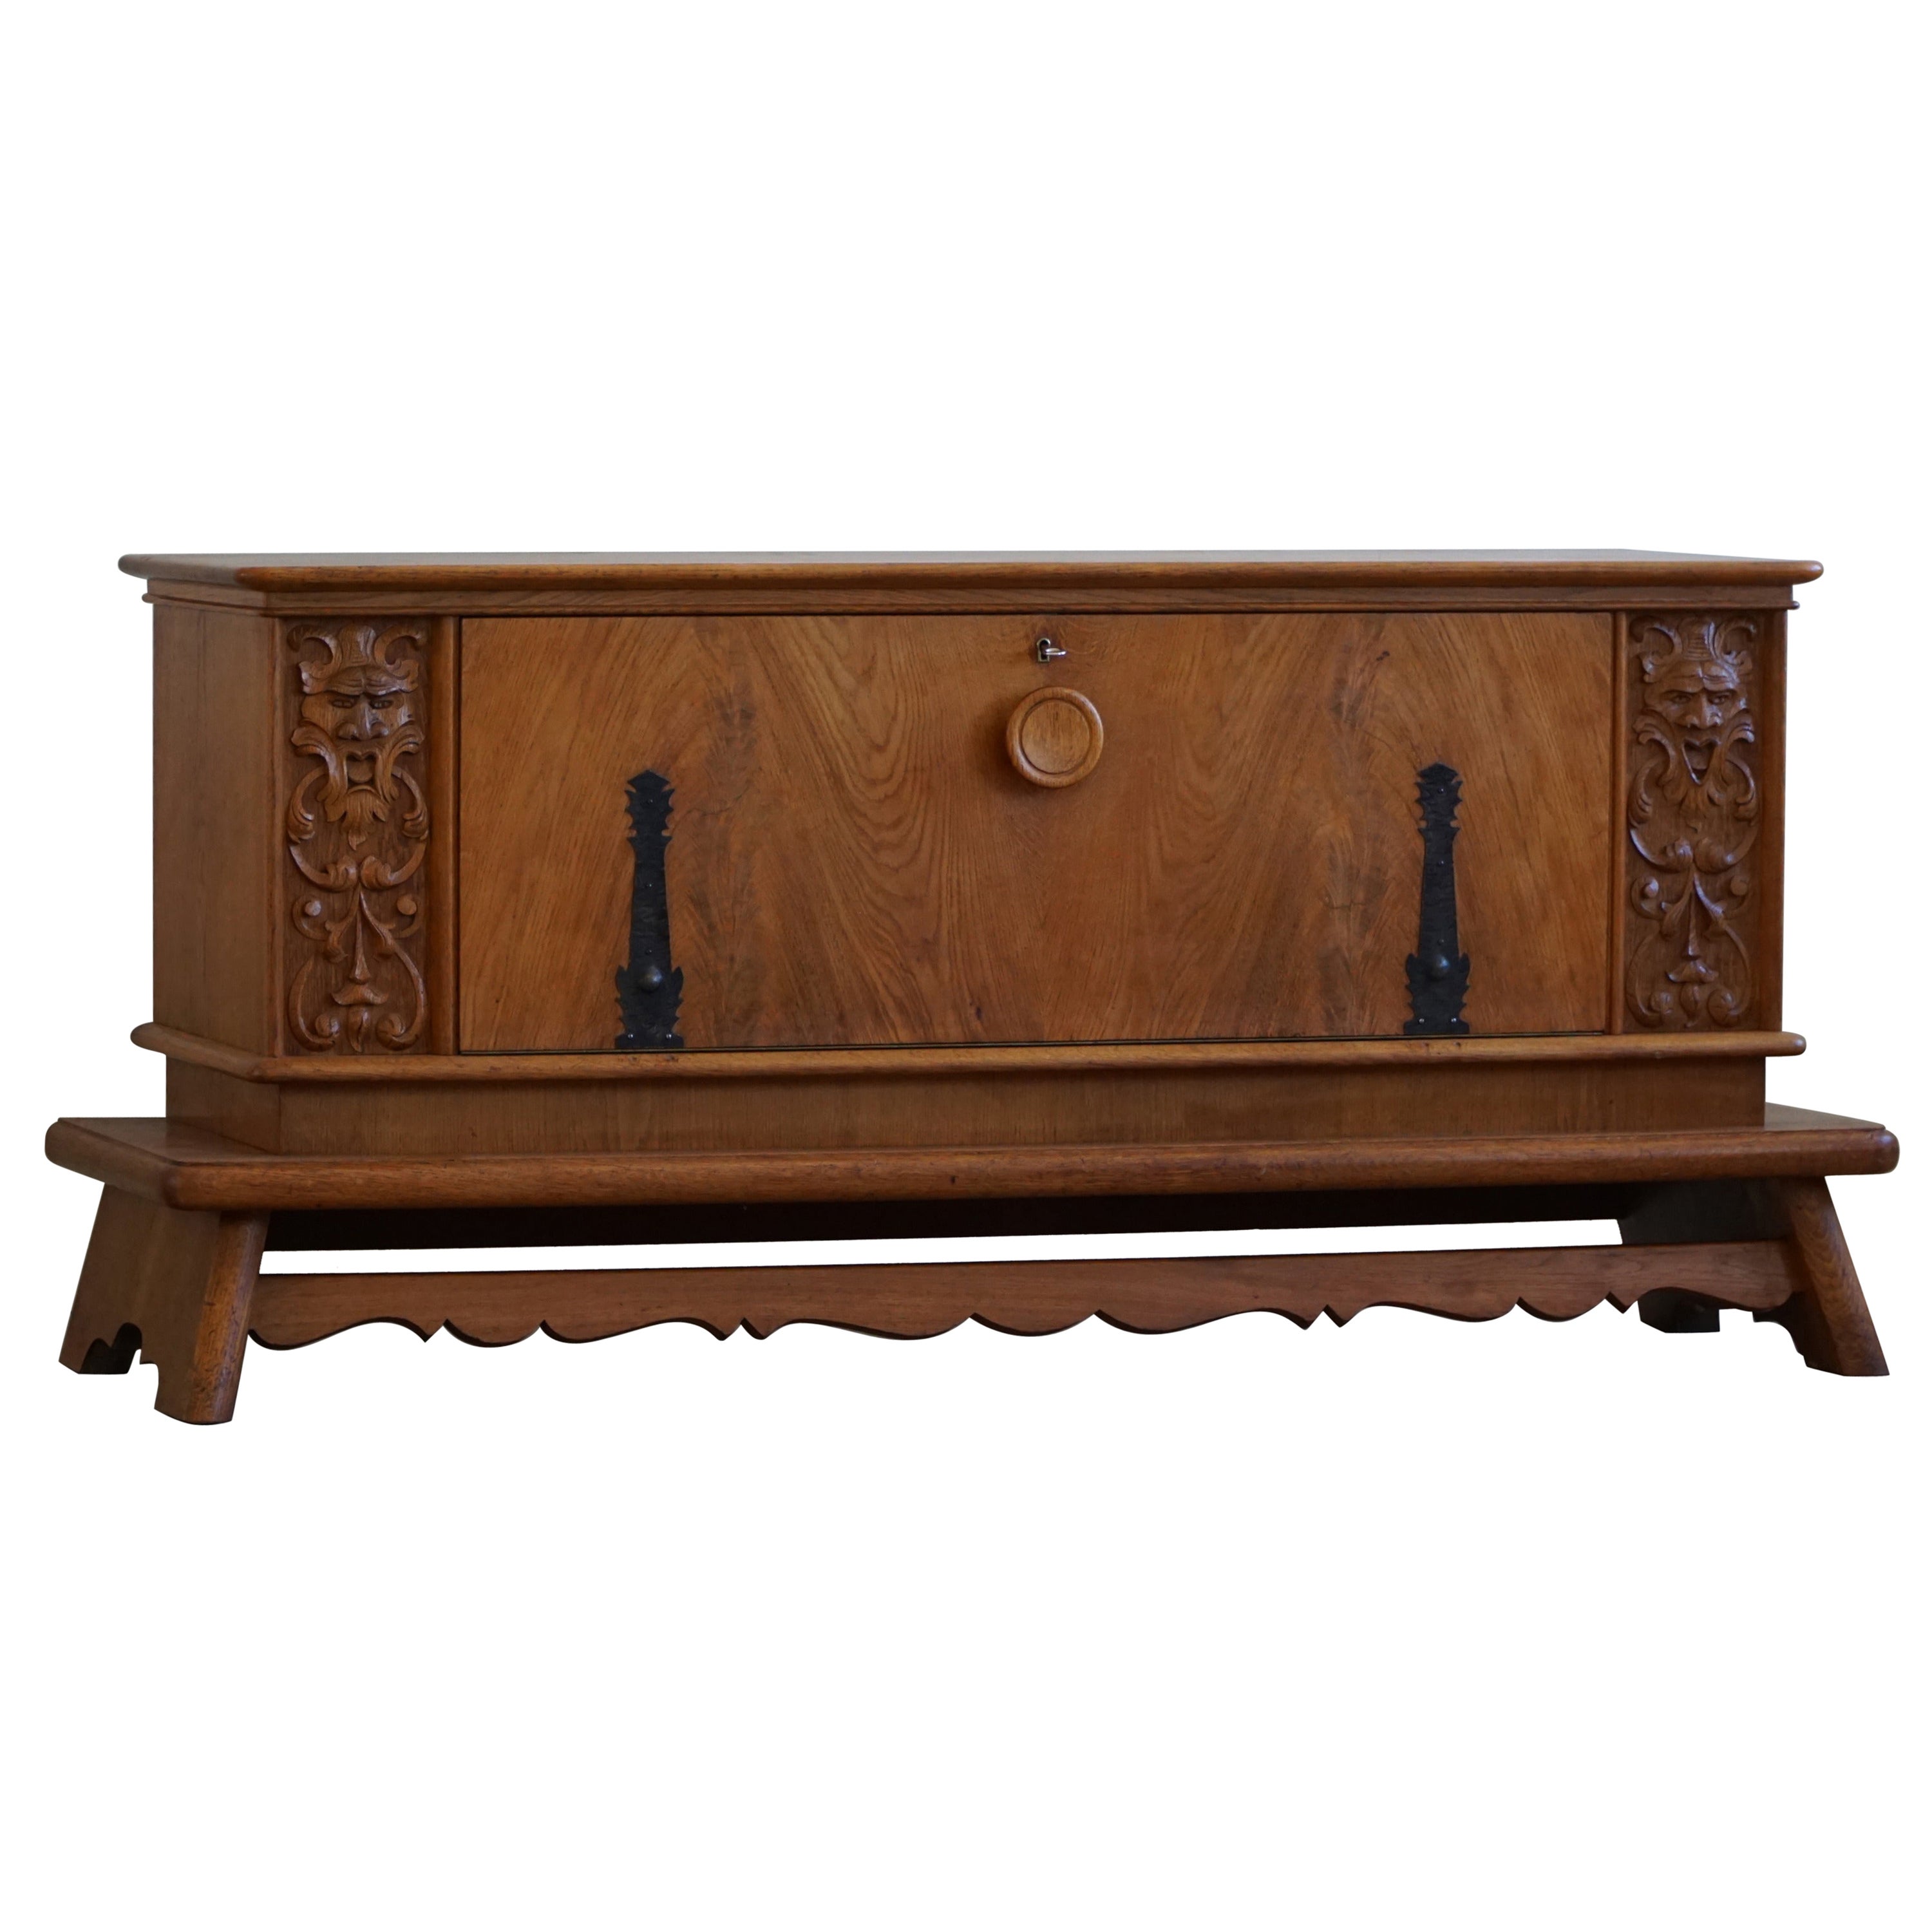 Danish Art Deco Sideboard Credenza in Solid Oak, Early 20th Century For Sale